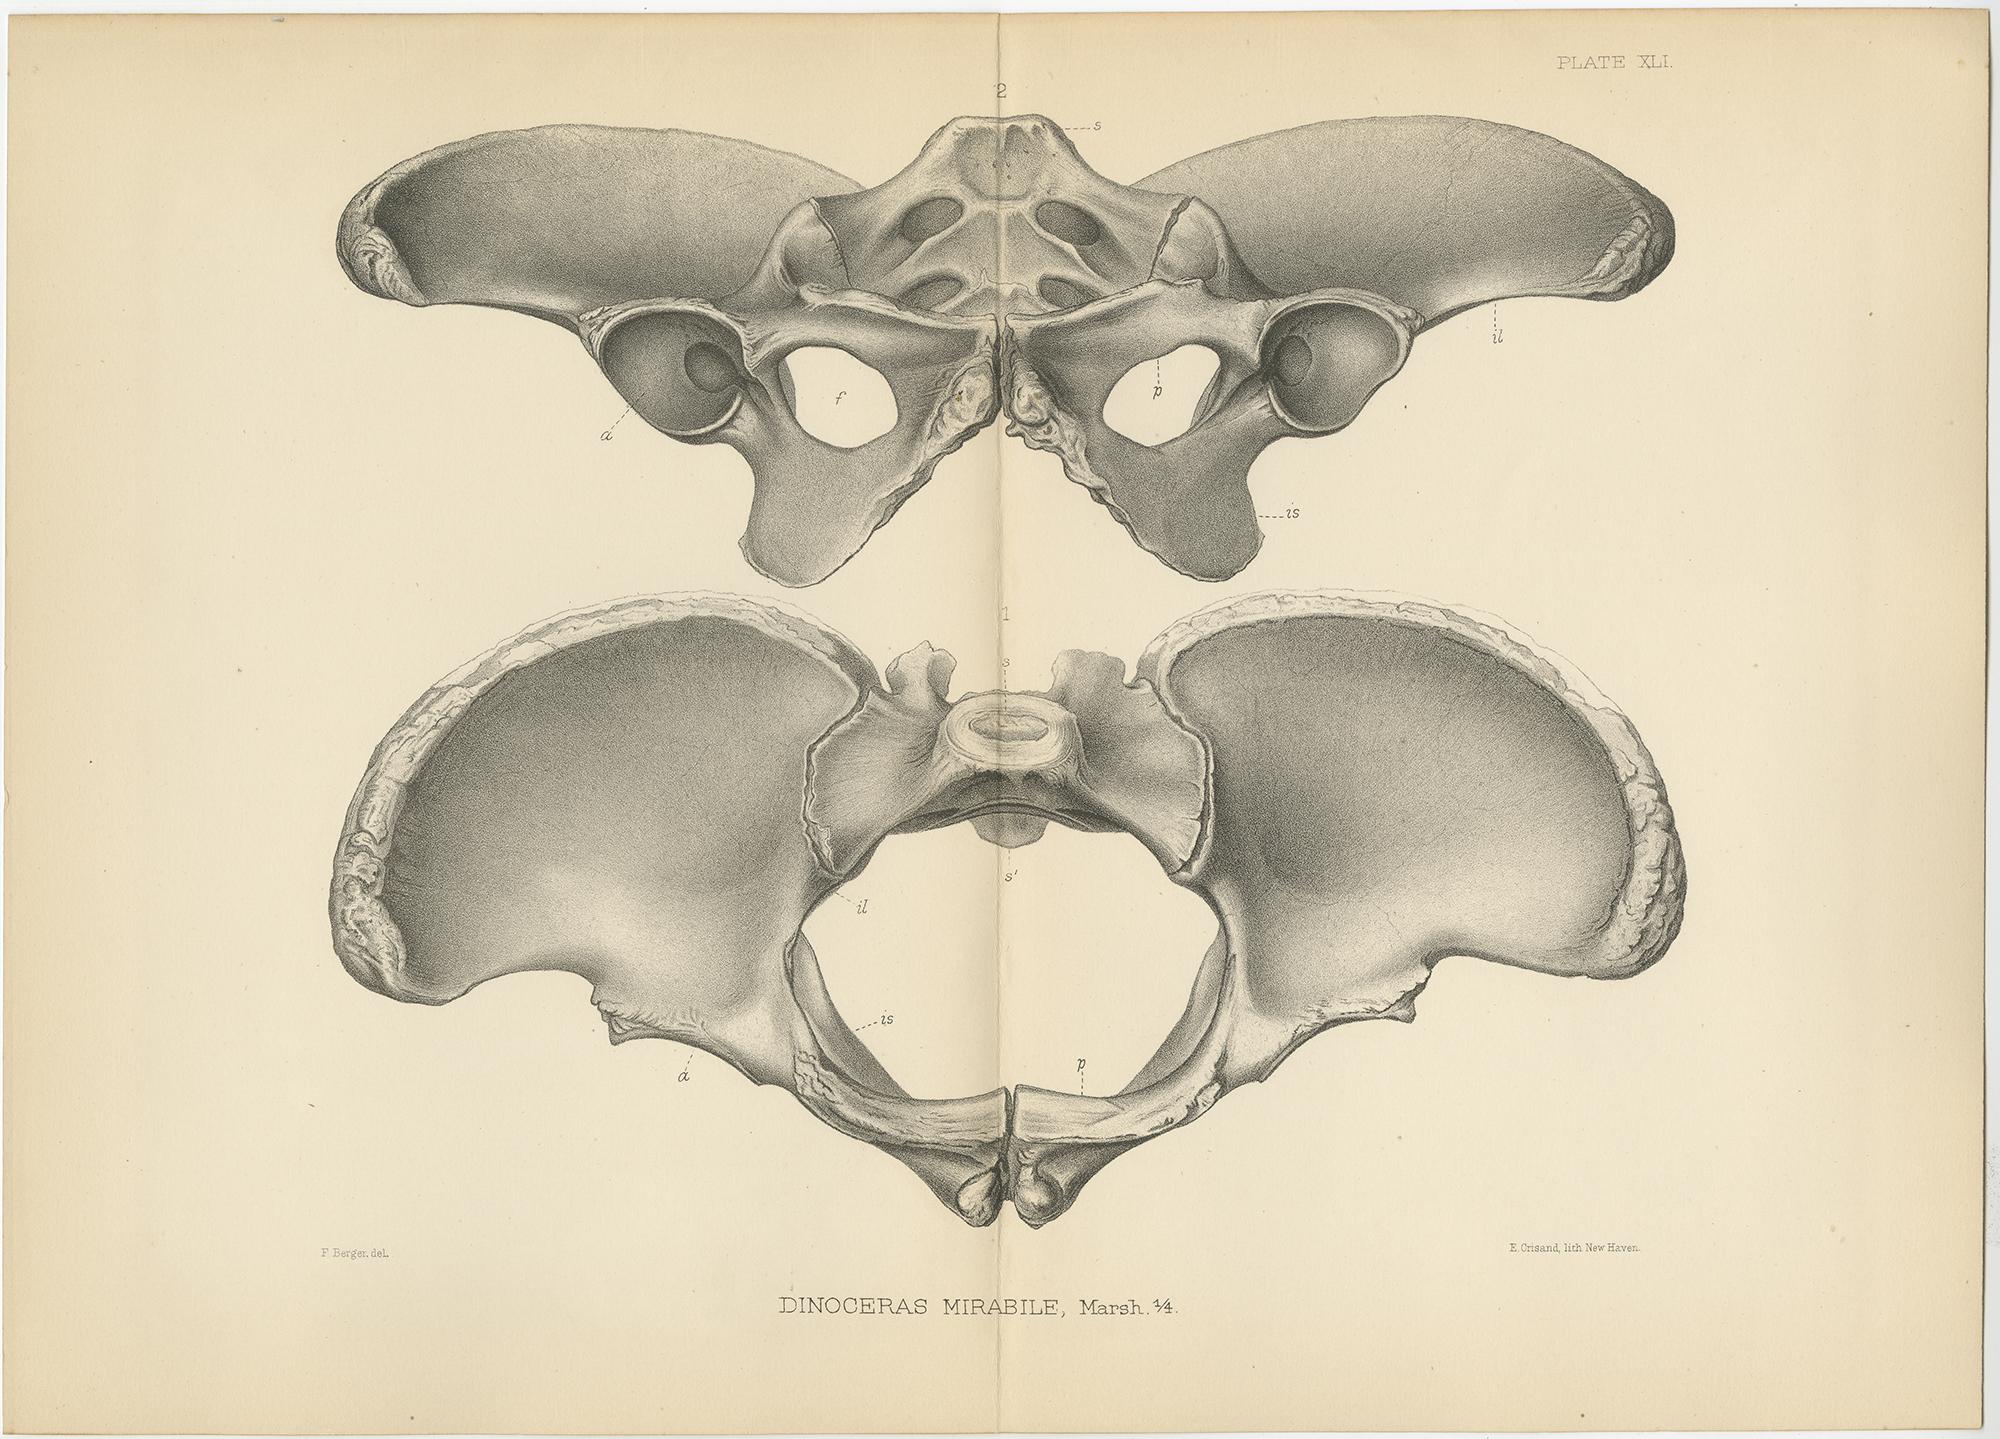 Set of two antique prints titled 'Dinoceras Mirabile'. Original lithograph of the pelvis of a Dinoceras Mirabile, an extinct genus of herbivorous mammal. This print originates from volume 10 of 'Monographs of the United States Geological Survey' by